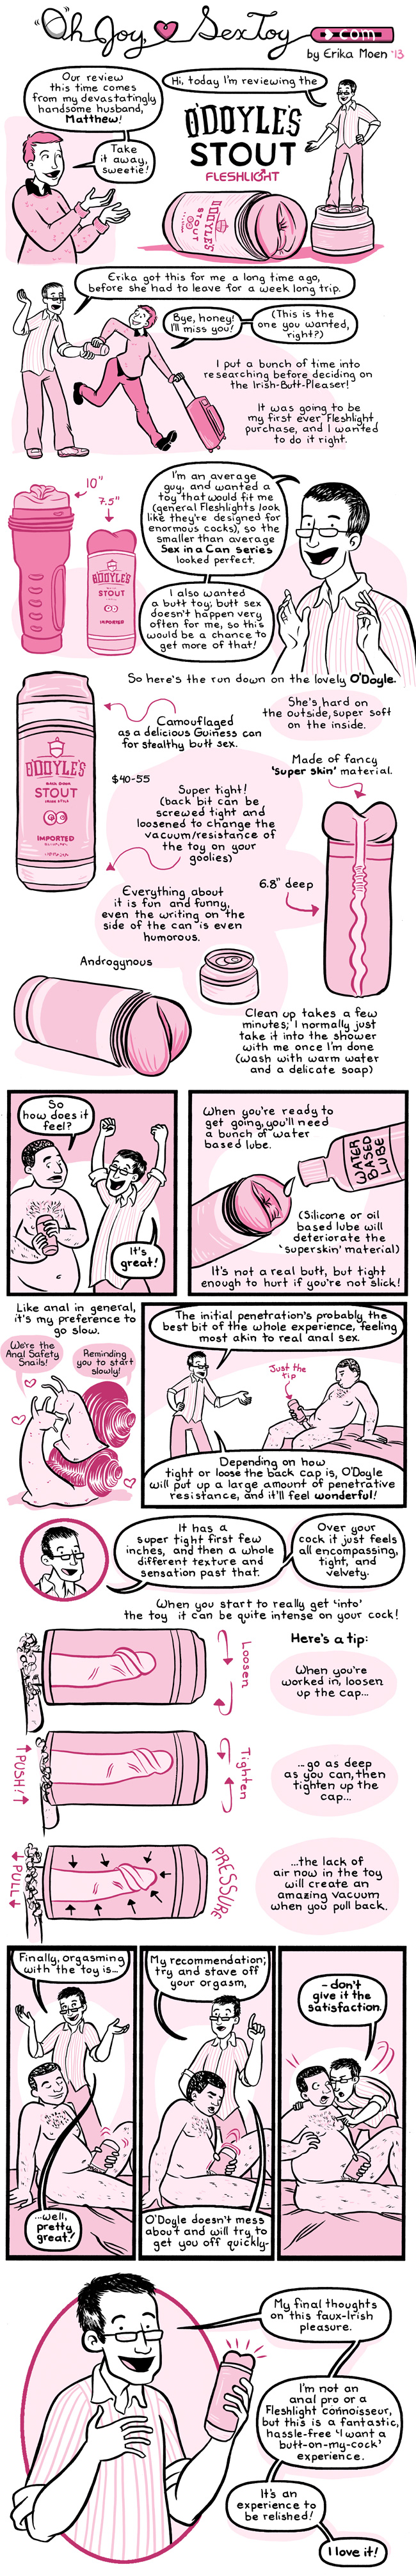 comic about the fleshlight sex toy